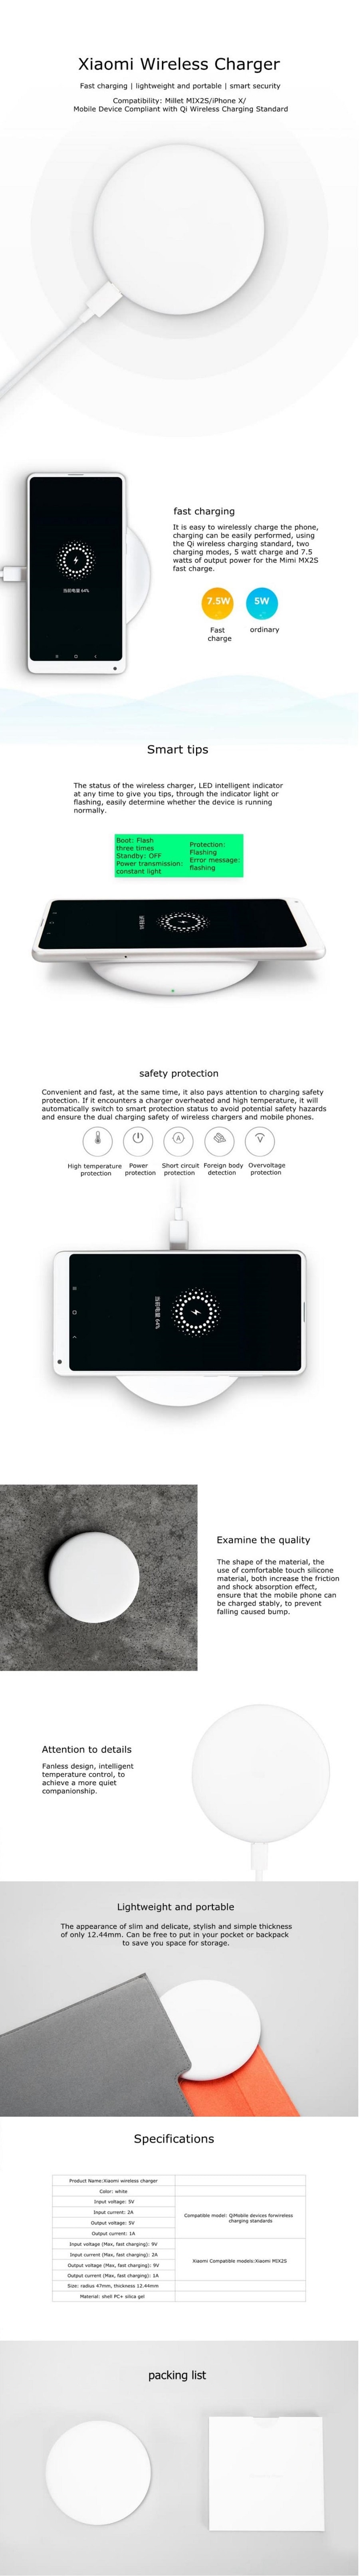 XIAOWireless Charger